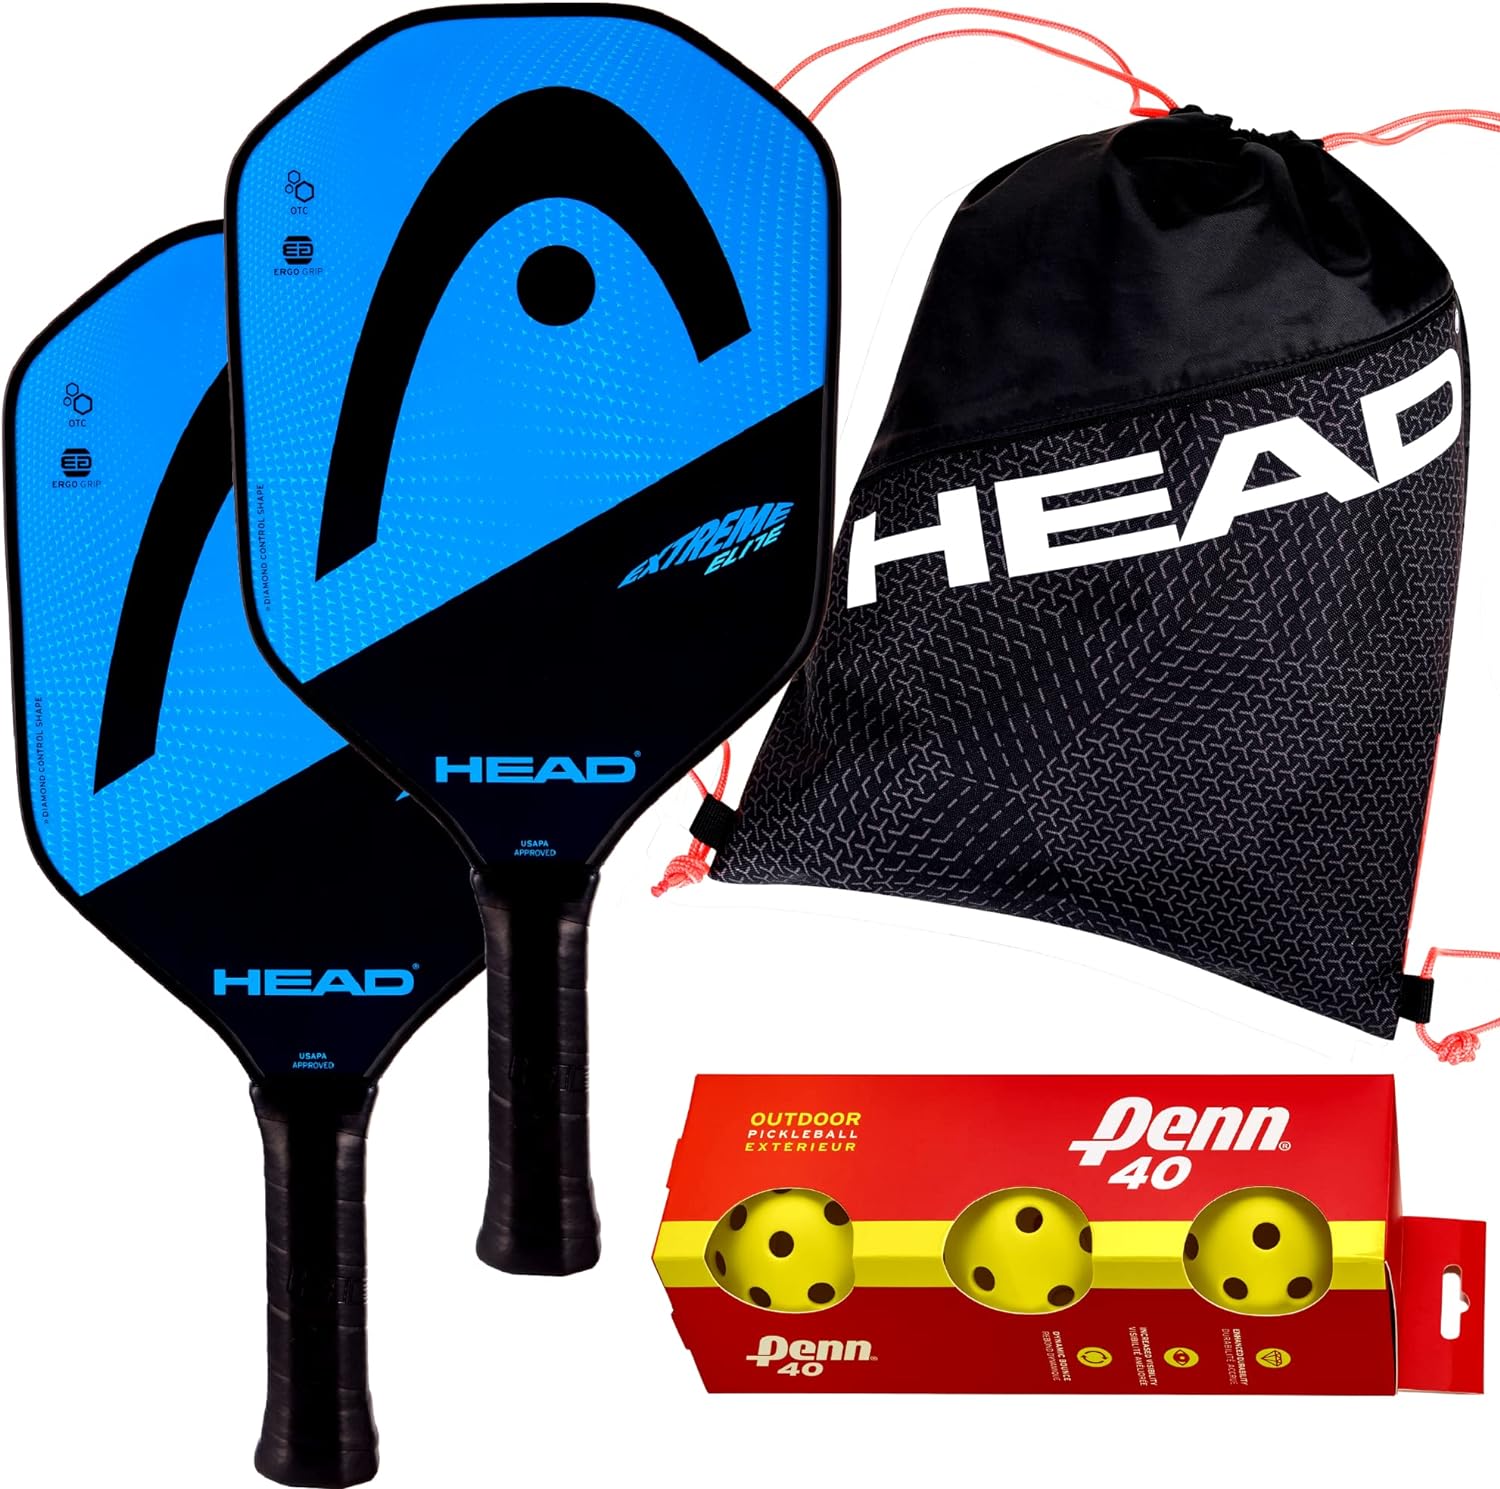 Pickleball Equipment for Pickle Ball Players Balls Backpack Paddles Grips Nets Accessories